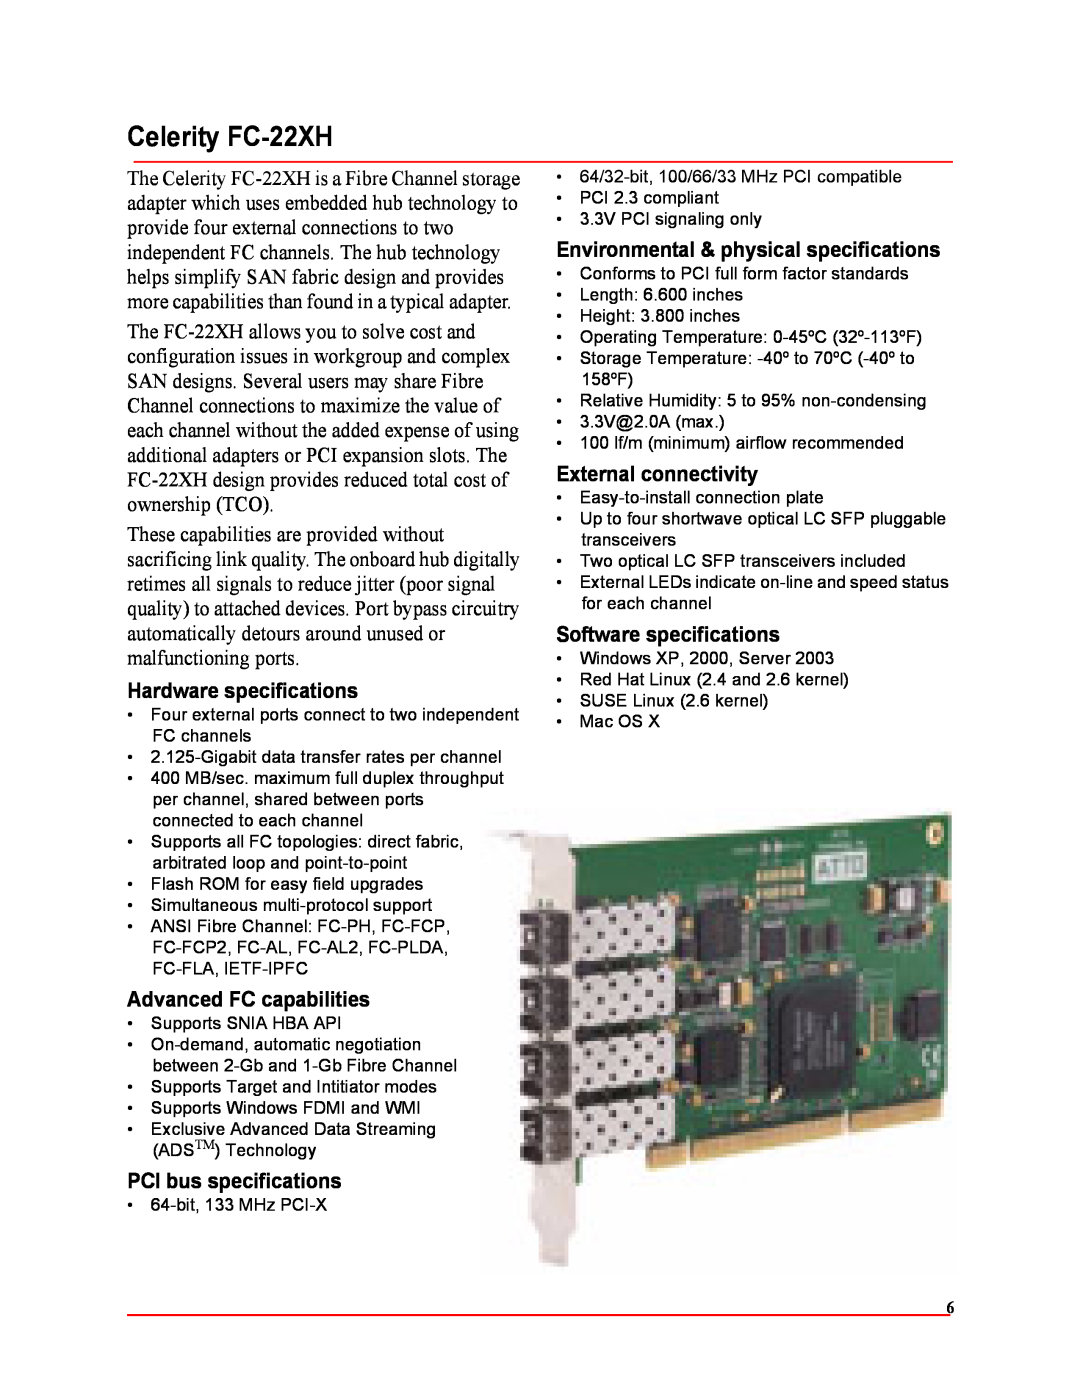 ATTO Technology FC-41XS Celerity FC-22XH, Hardware specifications, Advanced FC capabilities, PCI bus specifications 